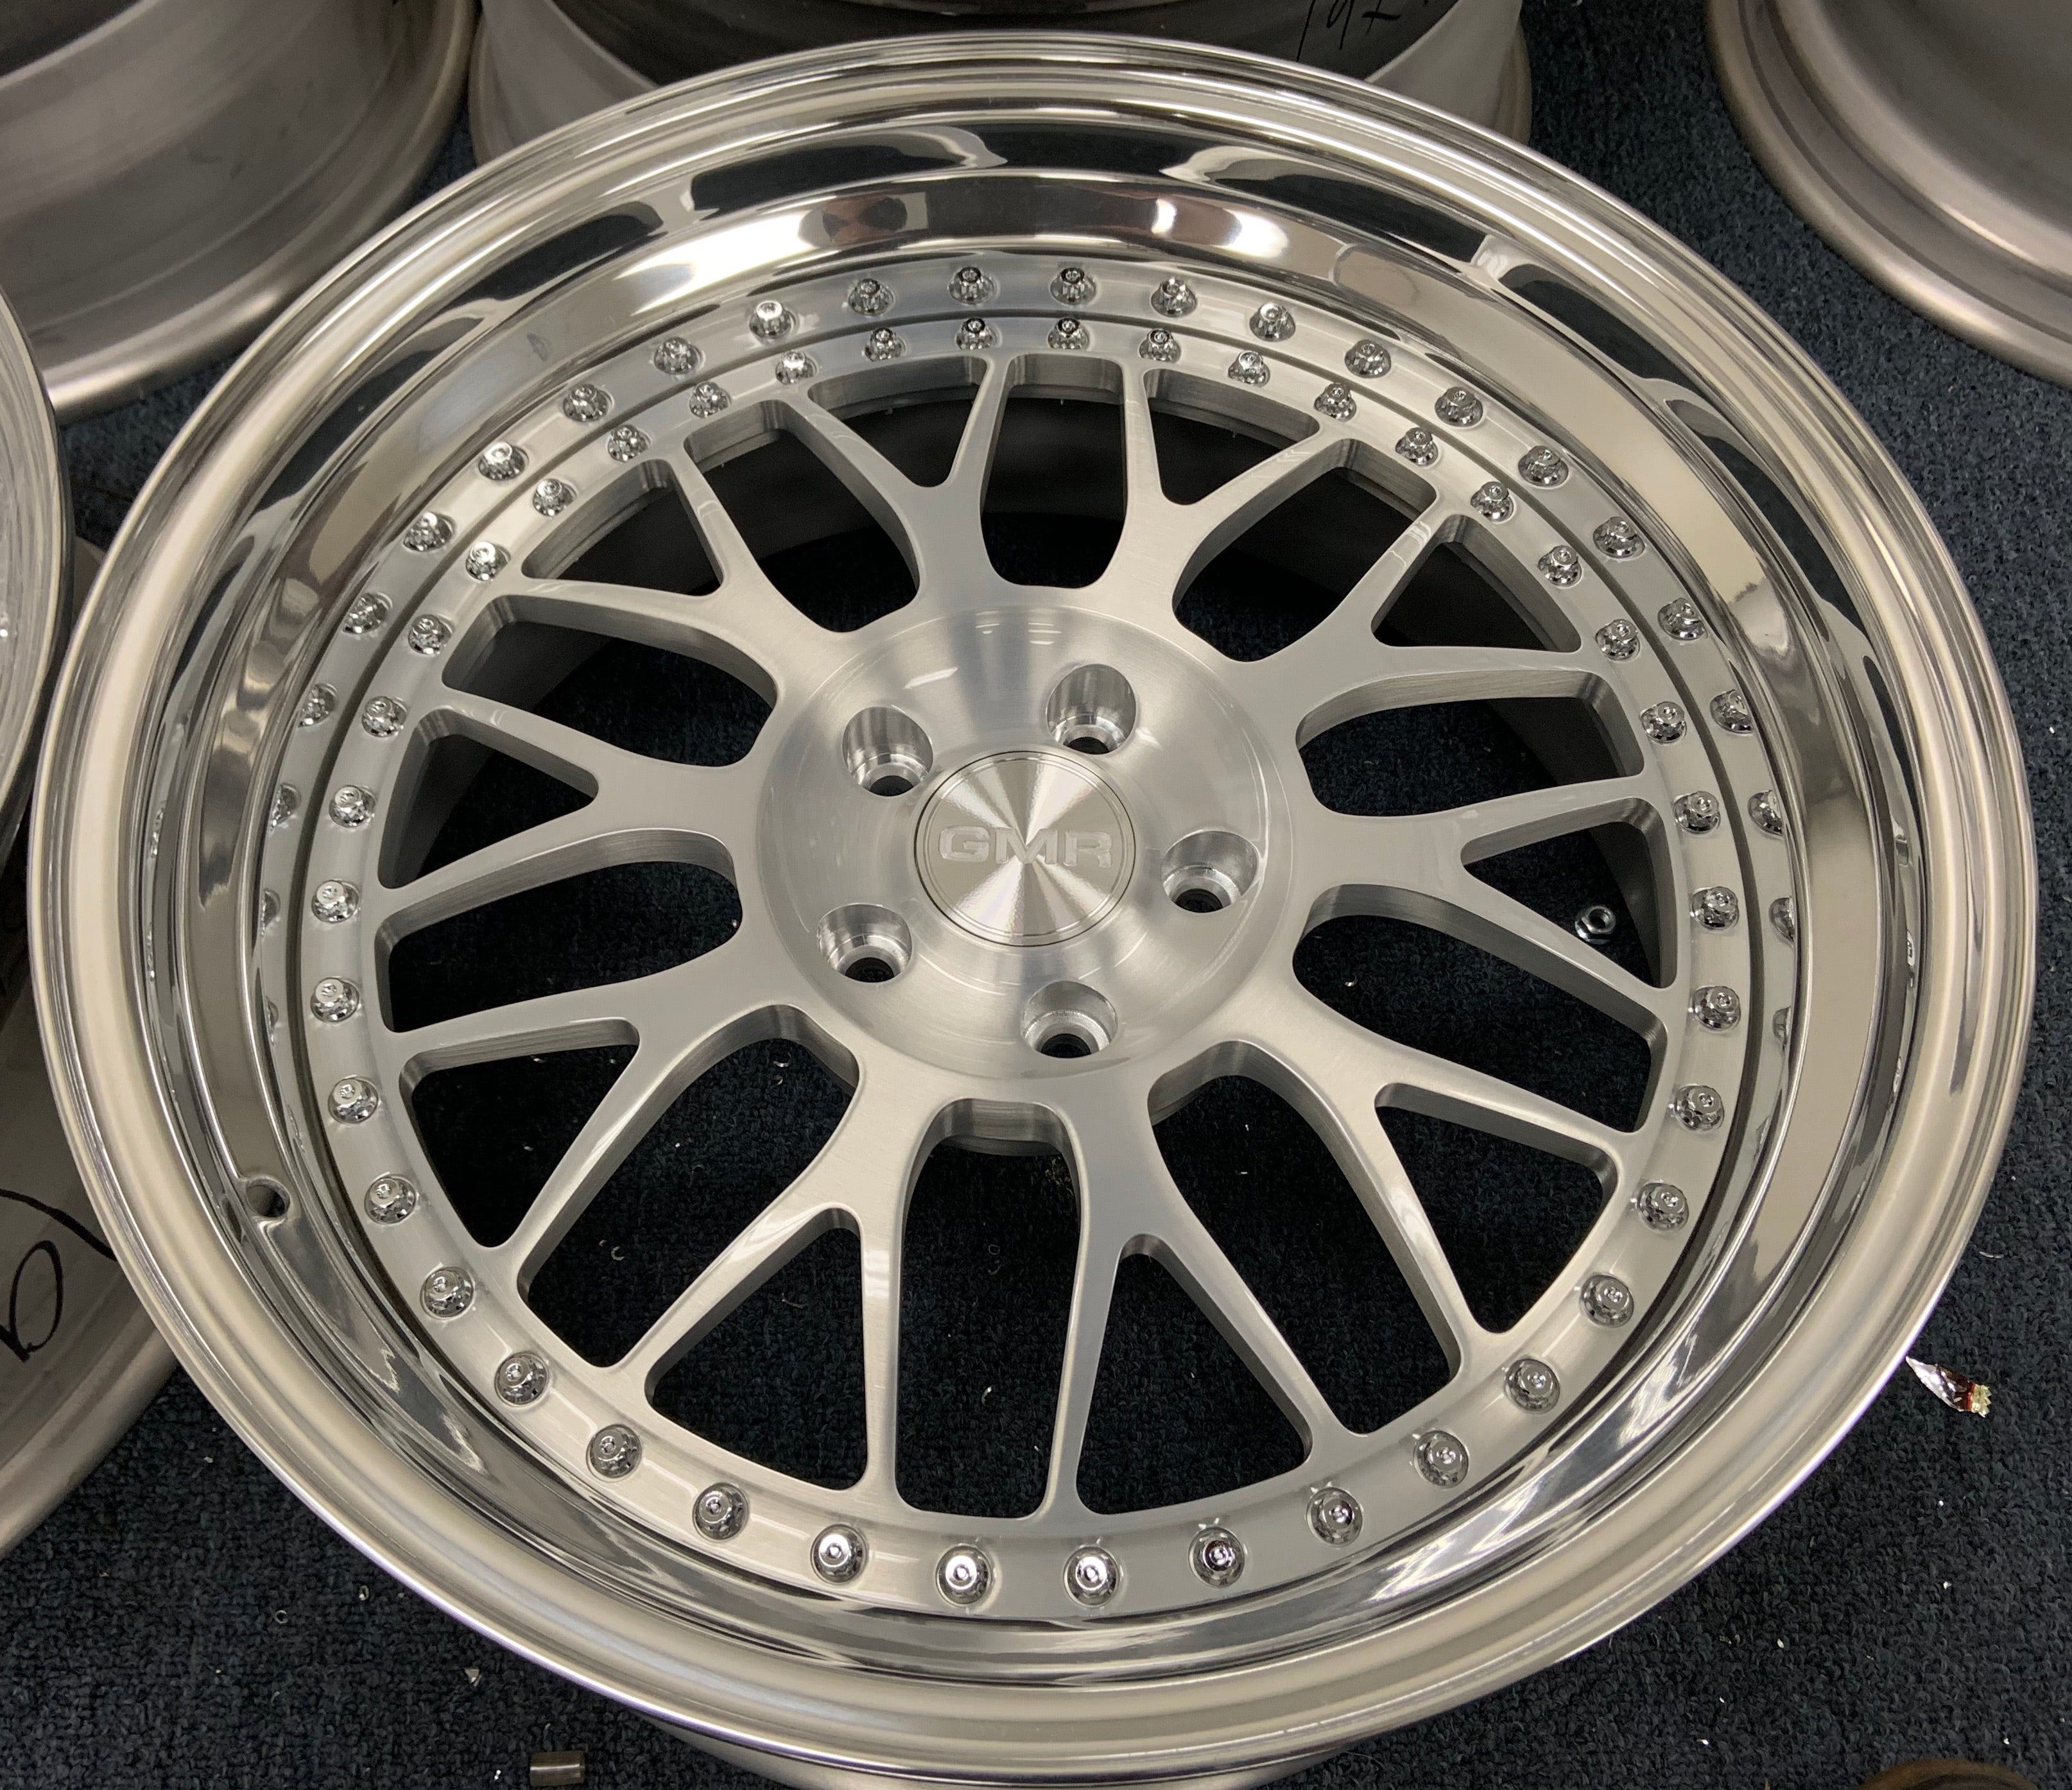 19” GMR GS-1 5x114.3 *BUILT TO ORDER*